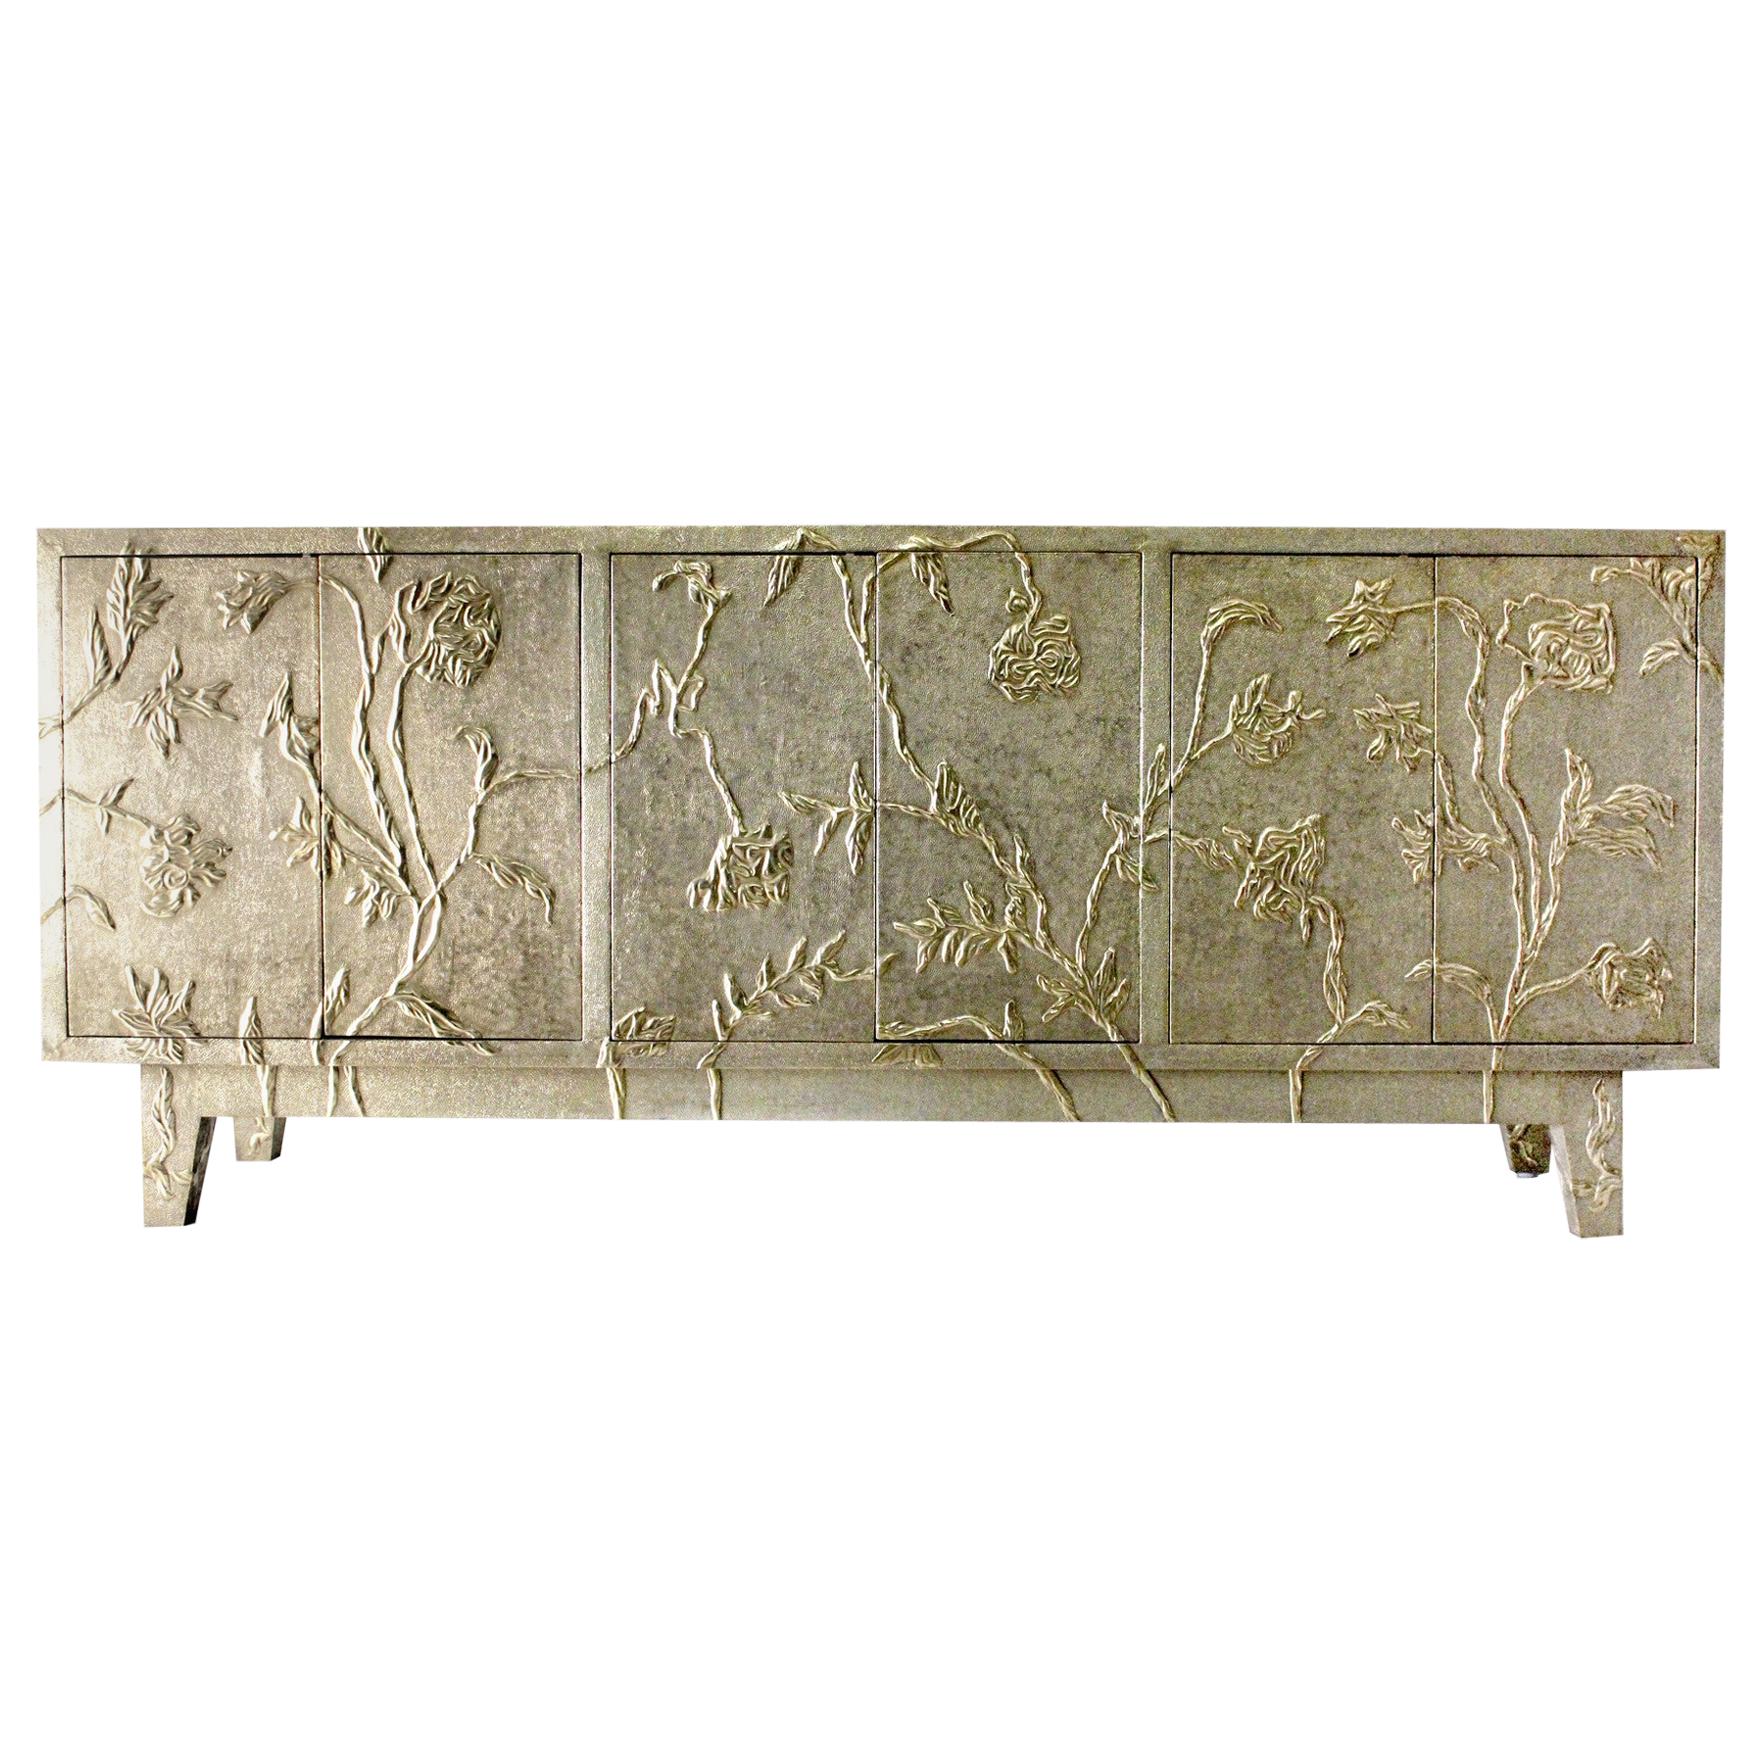 Modern Credenza Sideboard in Floral Brass Clad, Handmade in India by S. Odegard